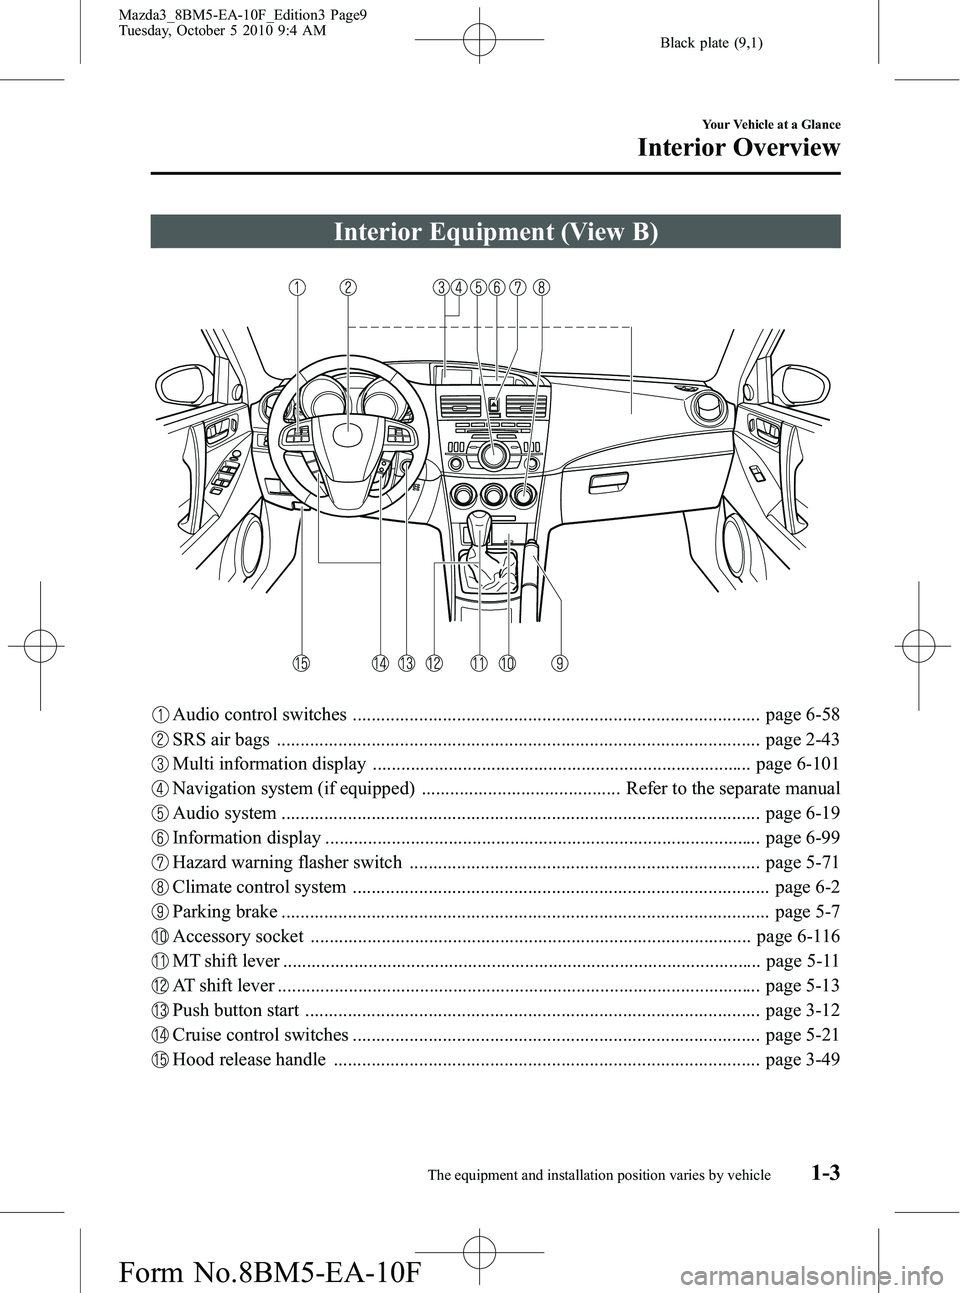 MAZDA MODEL 3 5-DOOR 2011  Owners Manual Black plate (9,1)
Interior Equipment (View B)
Audio control switches ...................................................................................... page 6-58
SRS air bags .....................